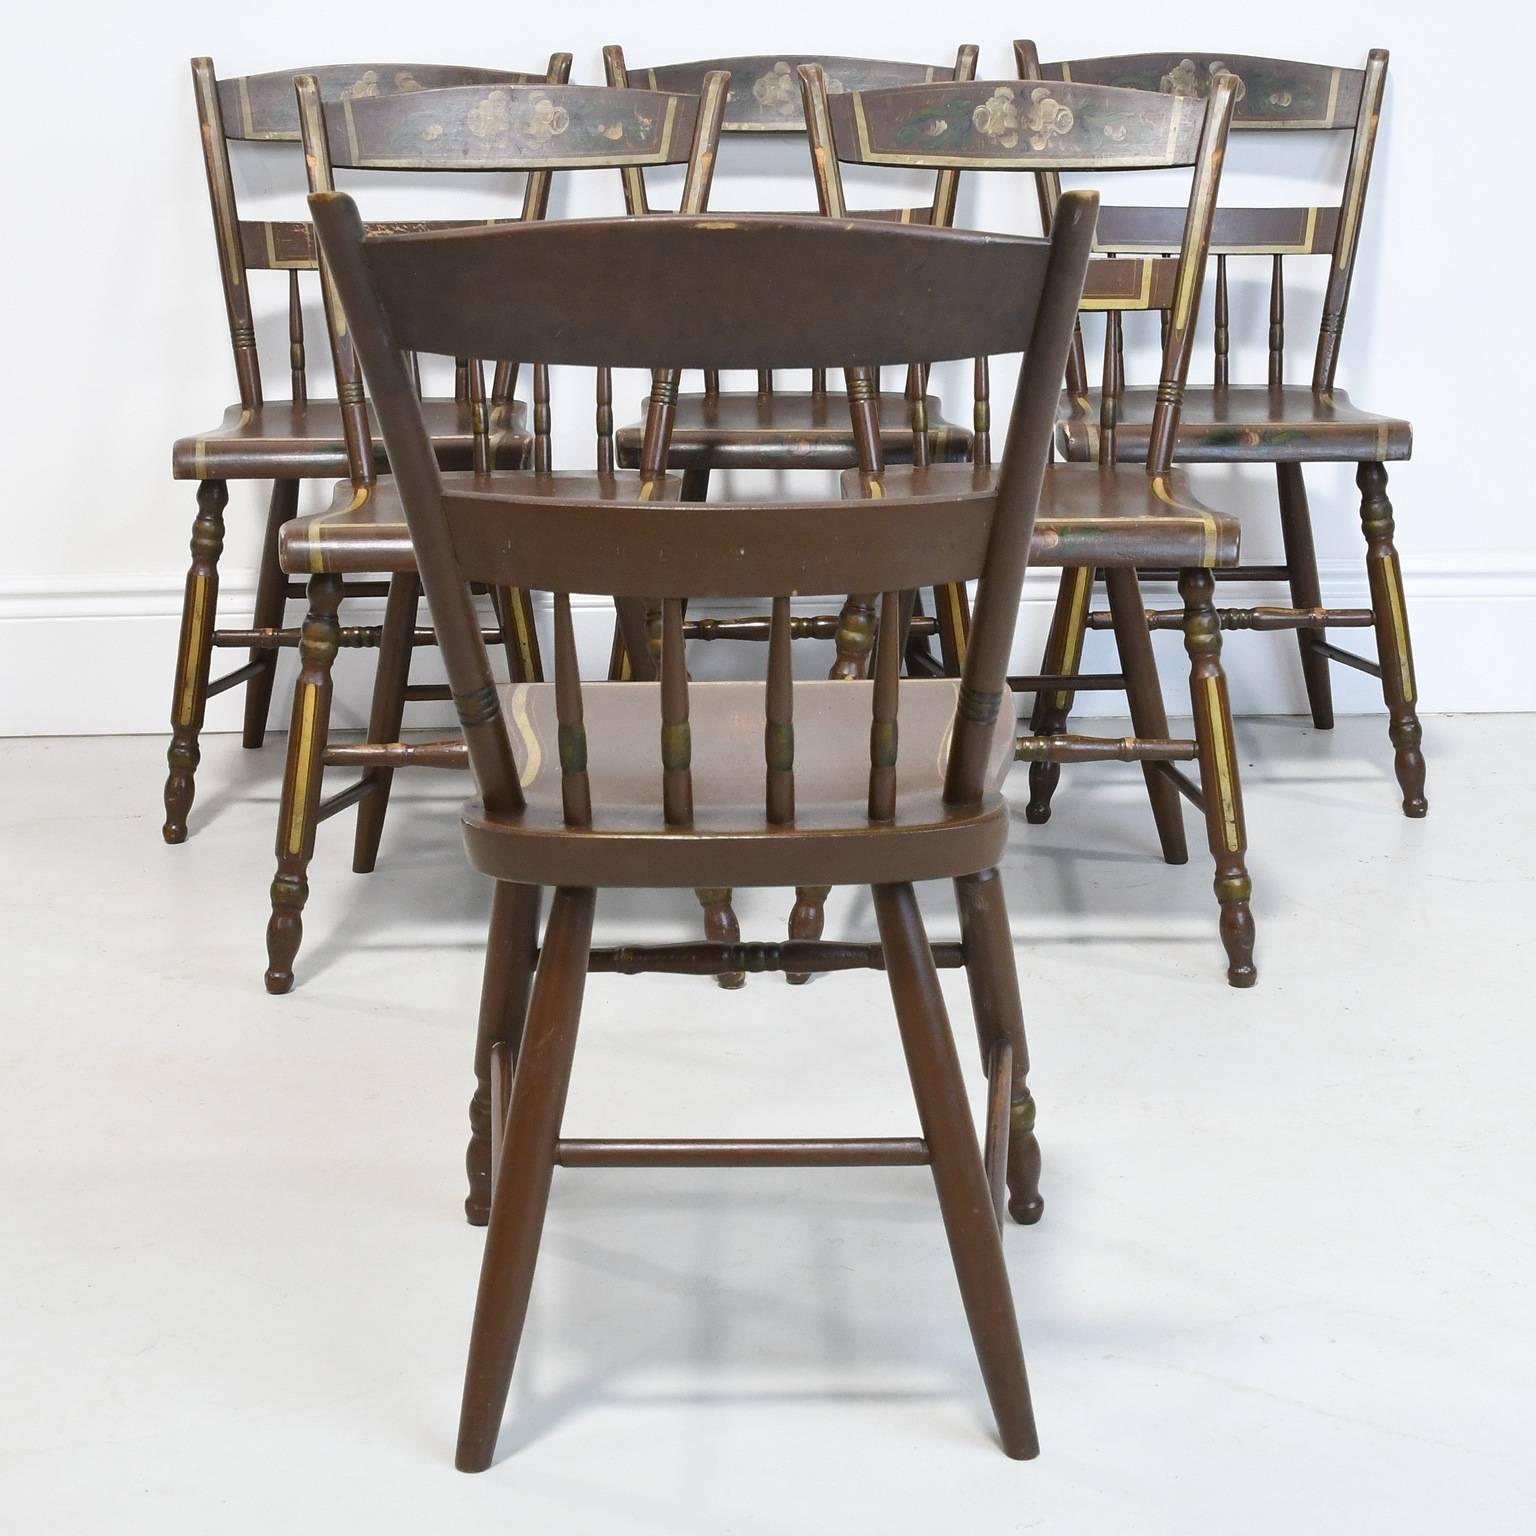 American Set of Six Pennsylvania 1/2 Spindle Back Plank Seat Kitchen Chairs, circa 1870